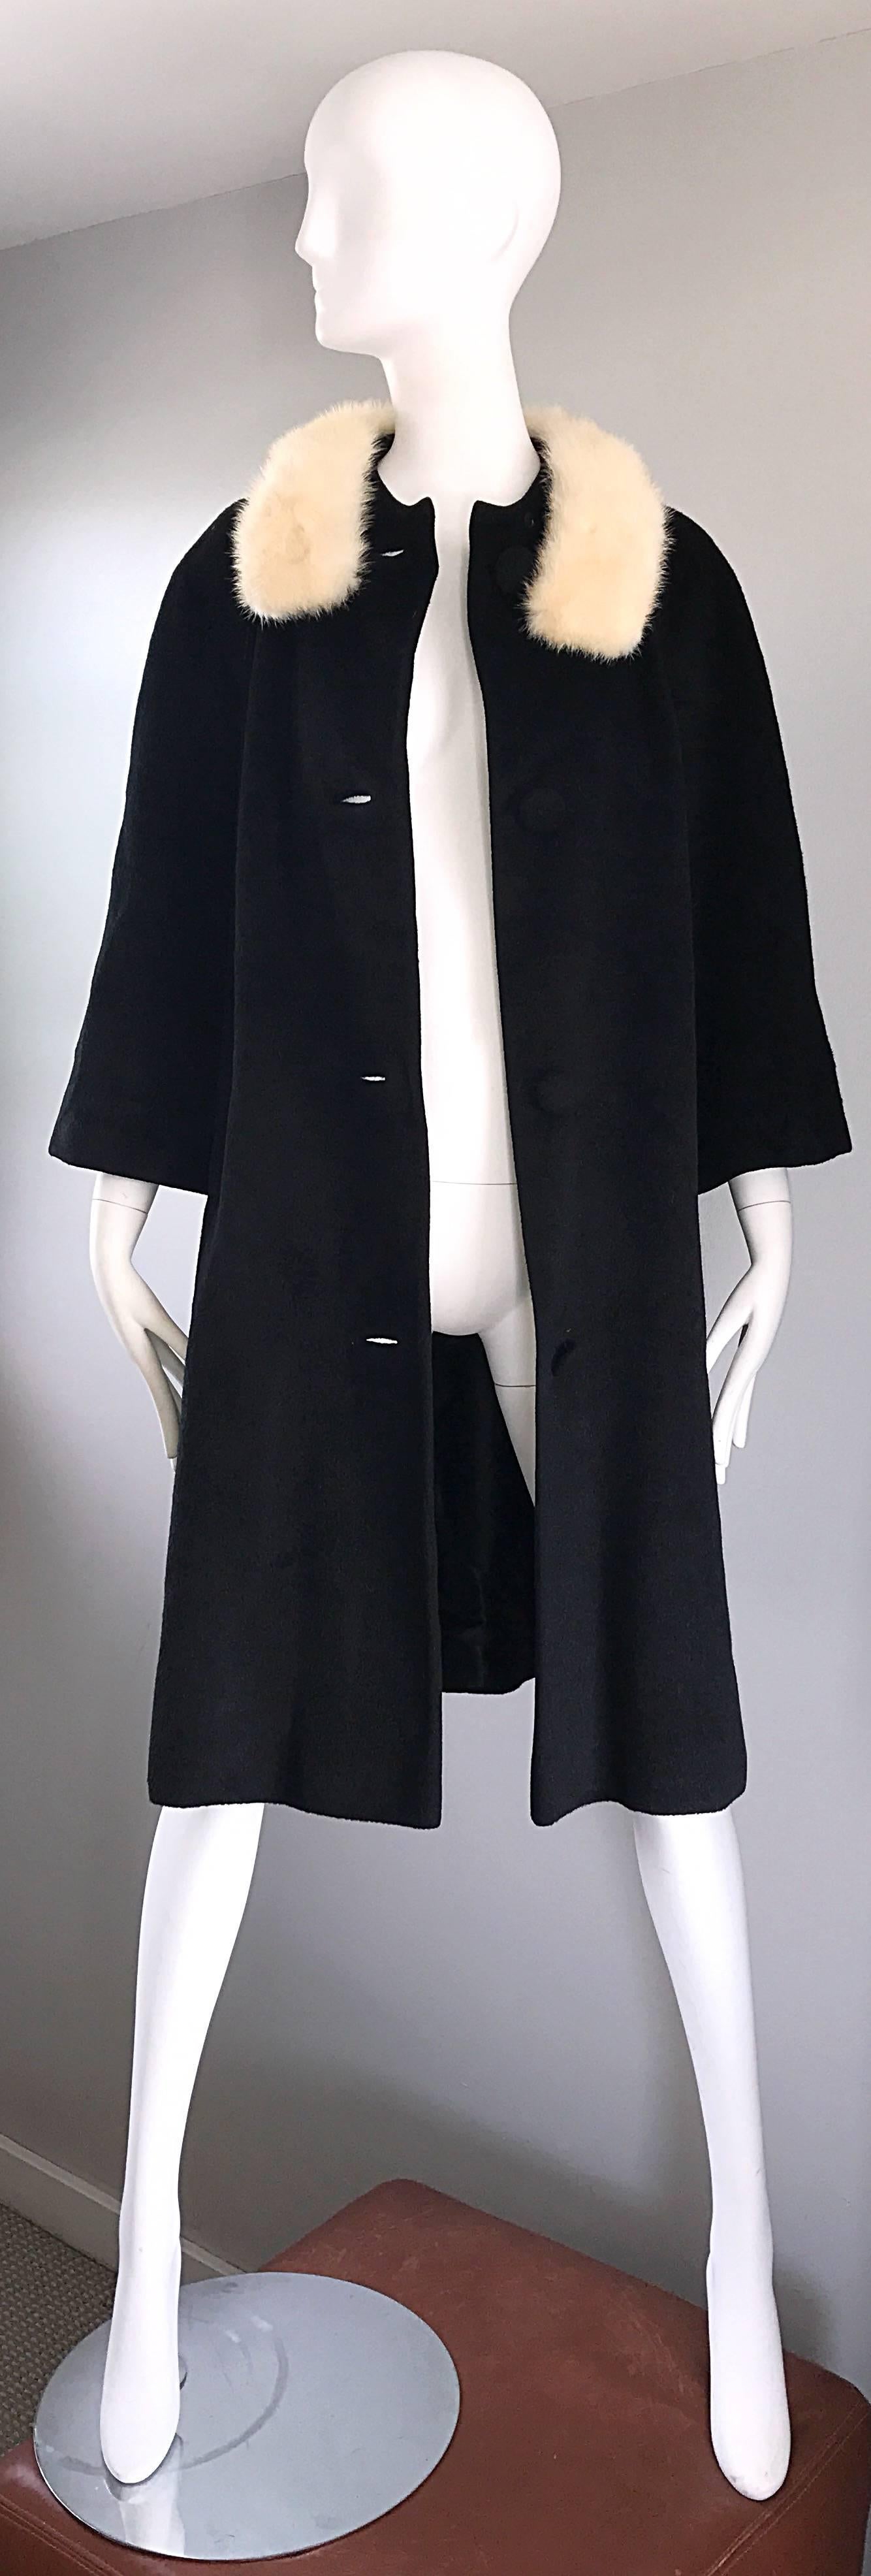 Lilli Ann 1960s Black and White Wool + Mink Fur Vintage 60s Swing Jacket Coat  In Excellent Condition For Sale In San Diego, CA